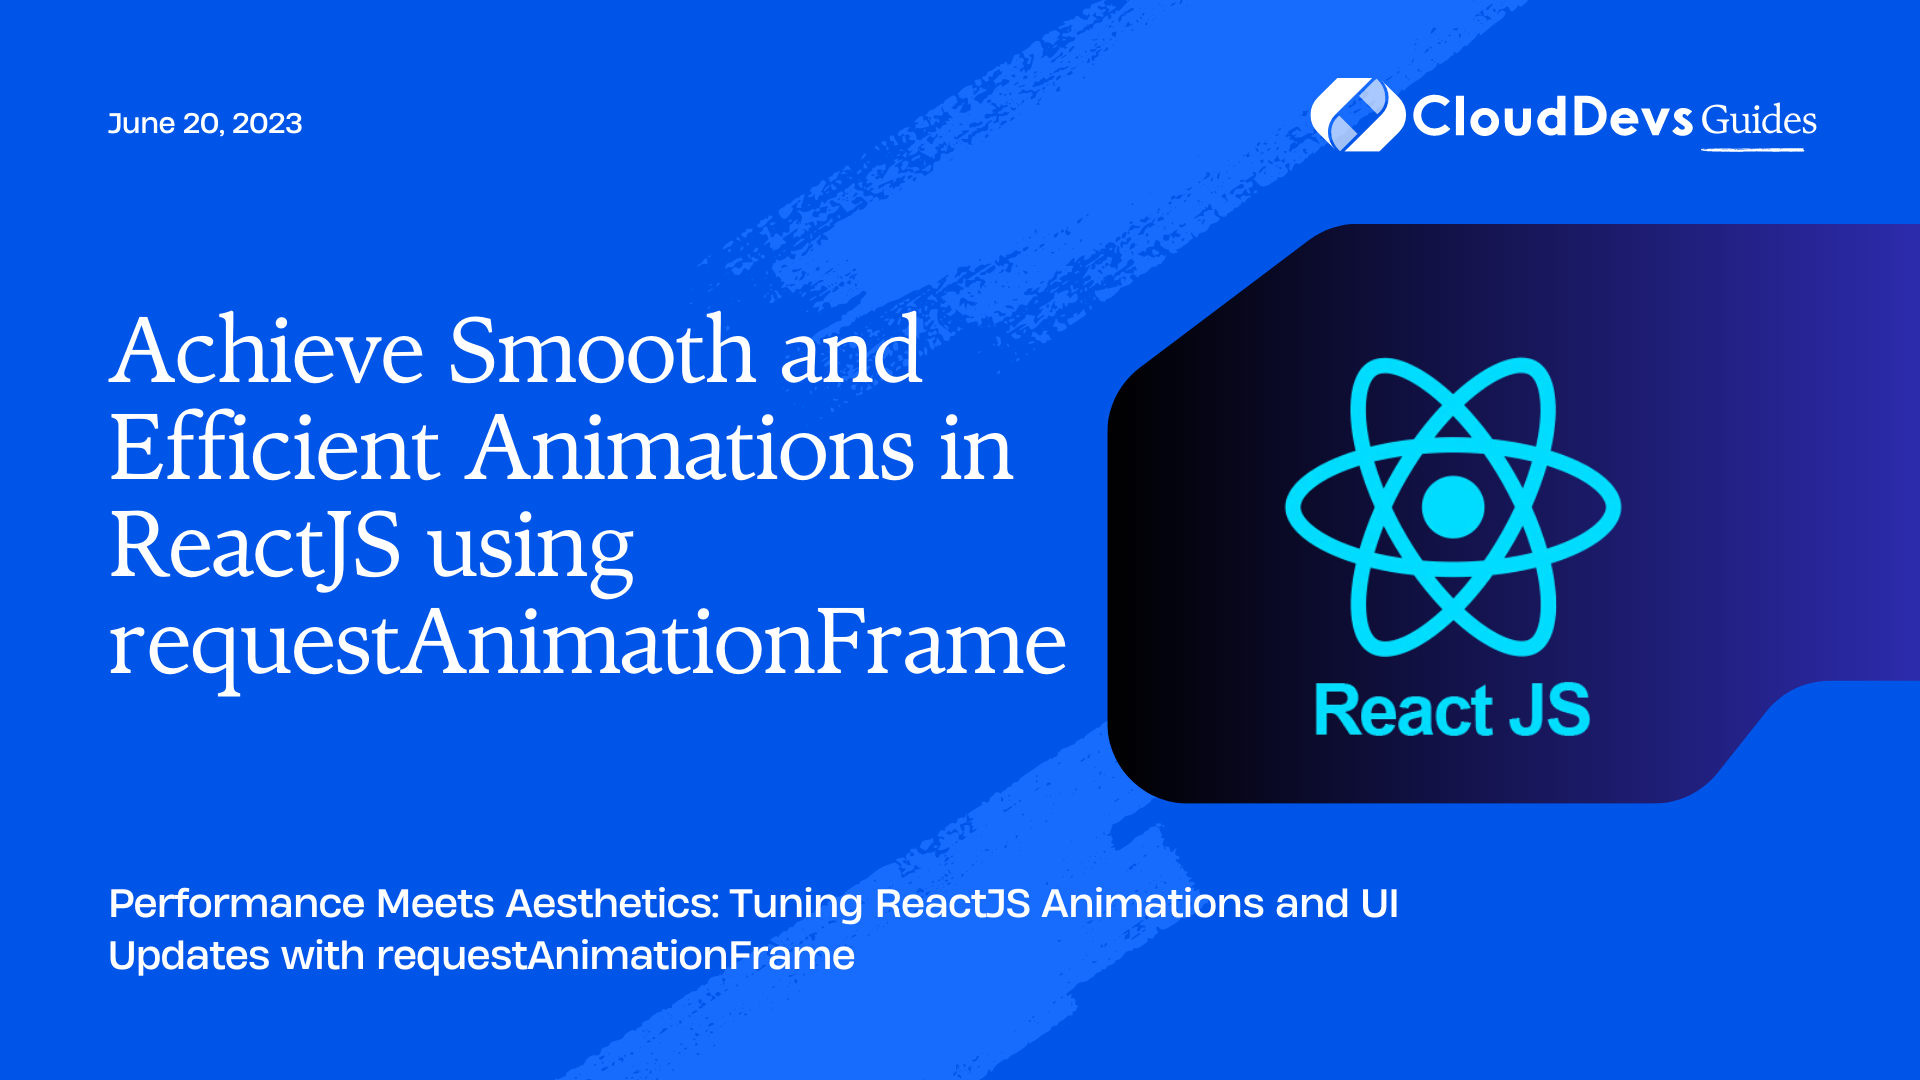 Achieve Smooth and Efficient Animations in ReactJS using requestAnimationFrame